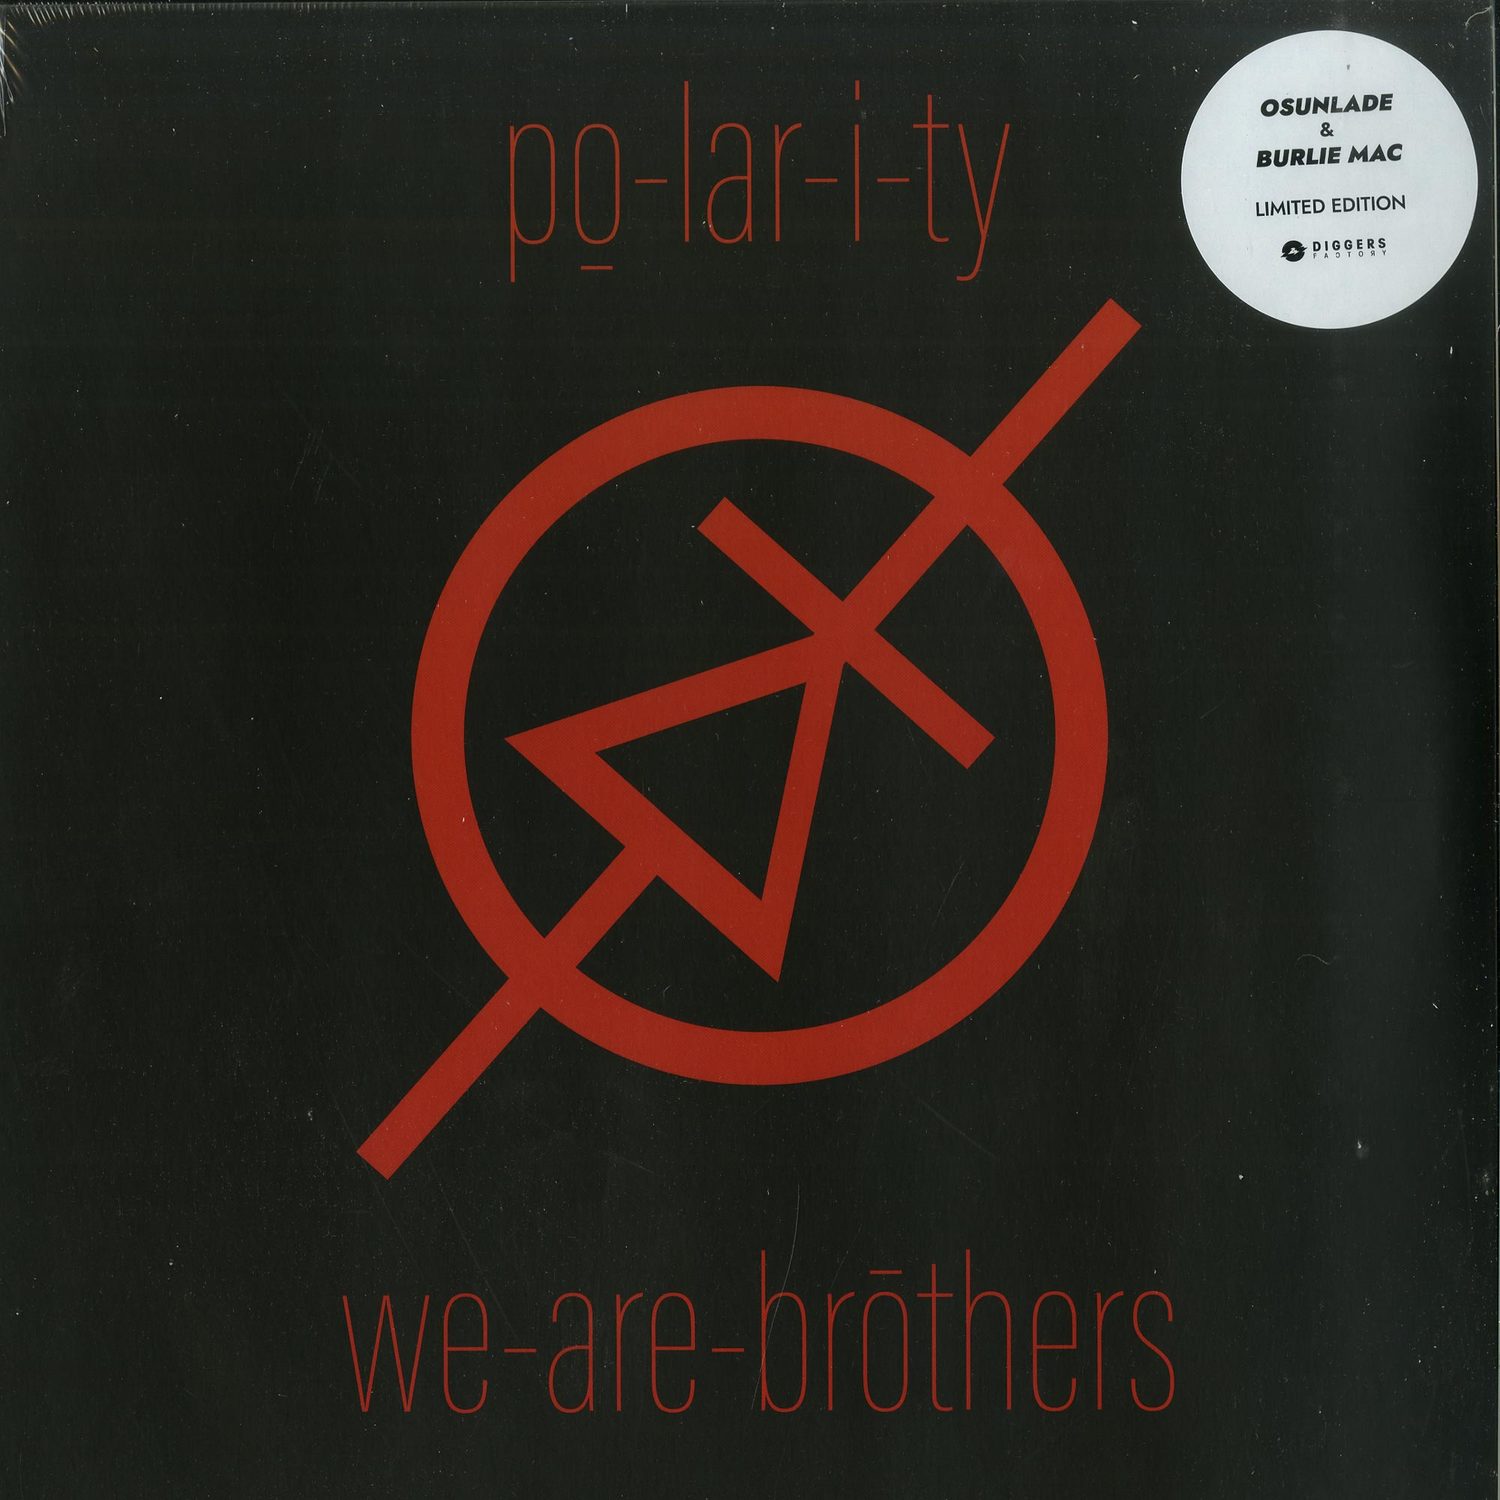 Po-lar-i-ty - WE-ARE-BROTHERS 